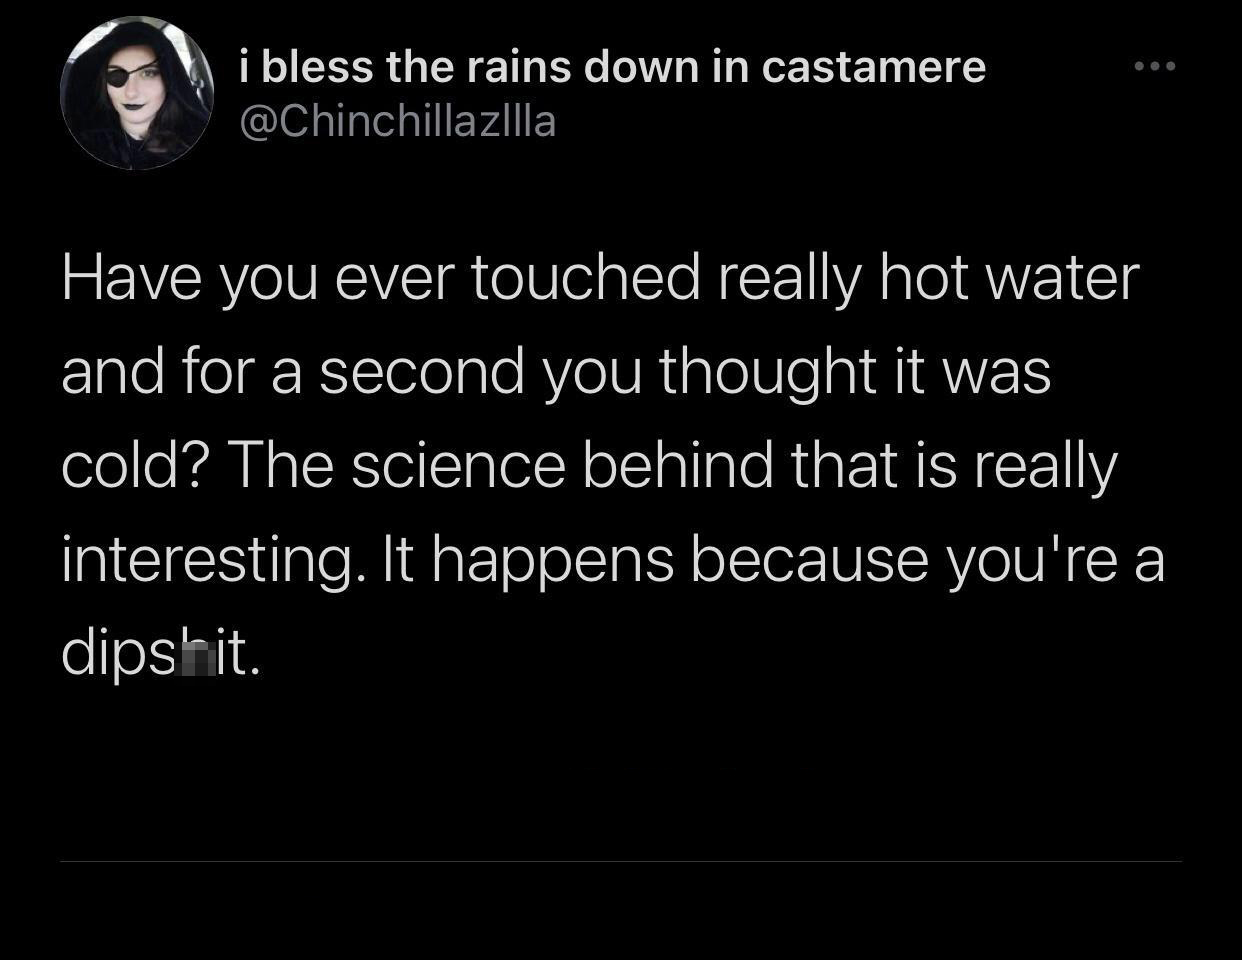 Clause - ... i bless the rains down in castamere Have you ever touched really hot water and for a second you thought it was cold? The science behind that is really interesting. It happens because you're a dipshit.